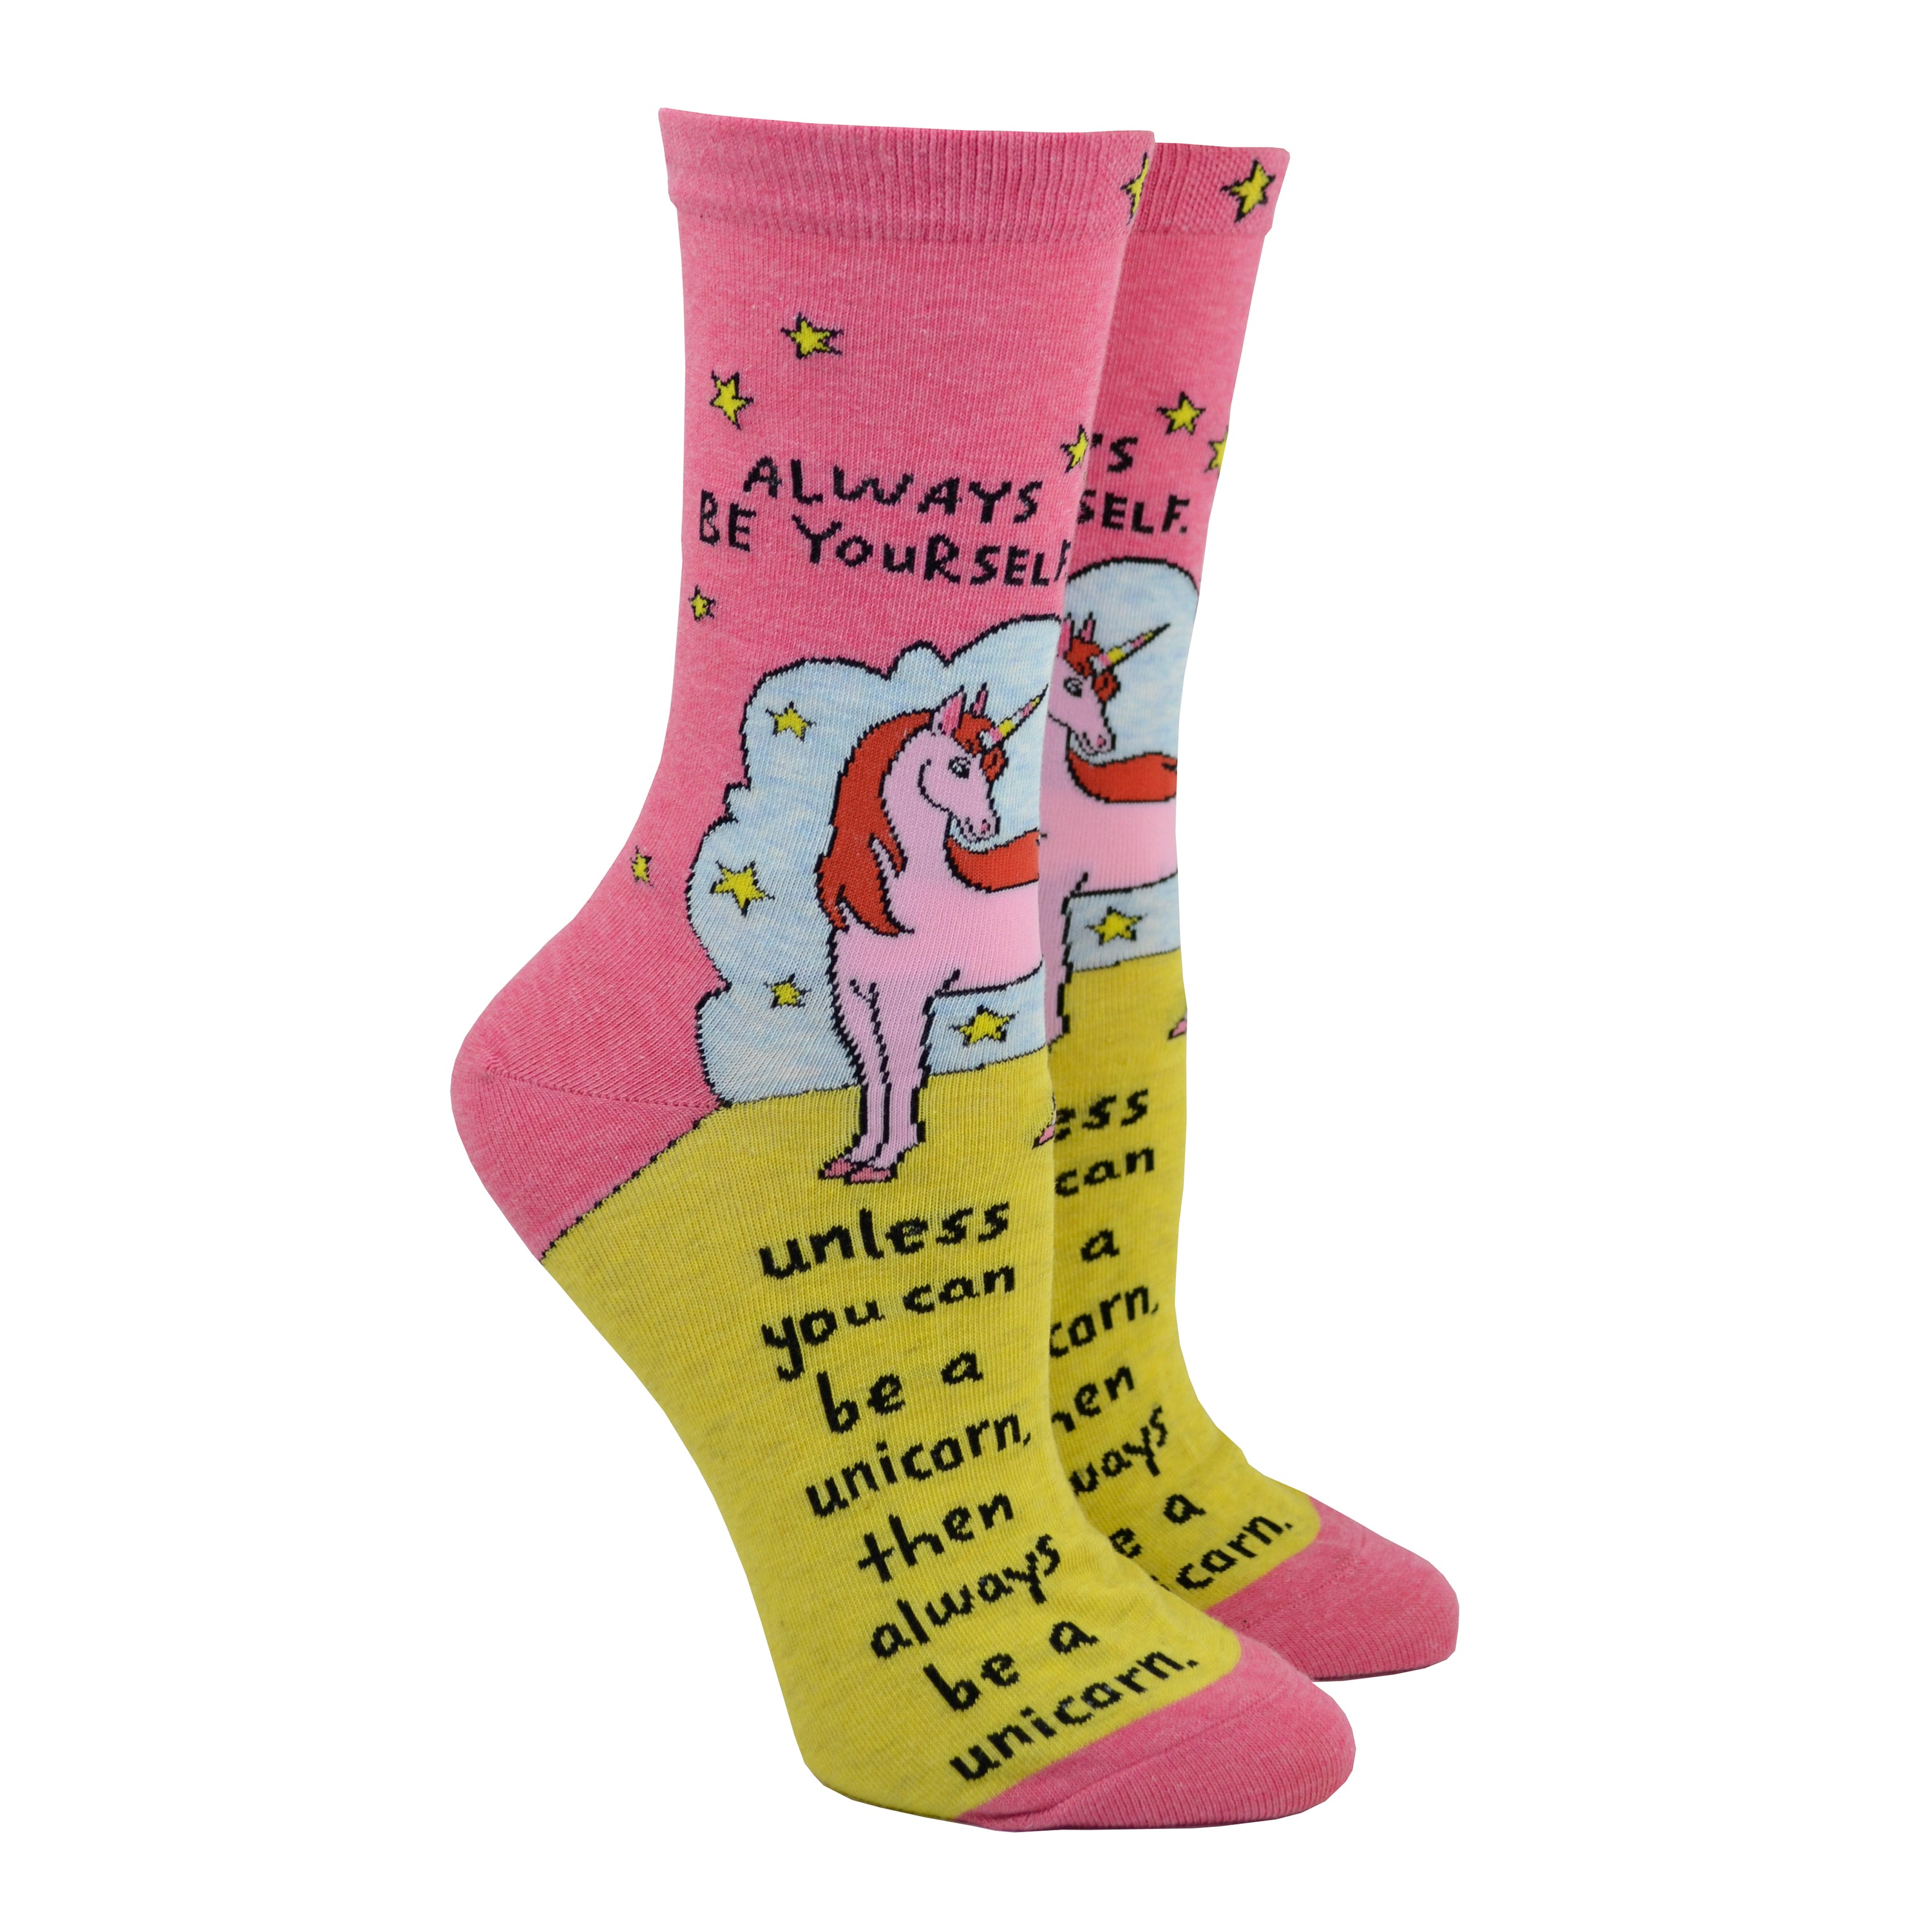 Shown on a leg form, these pink cotton women's crew socks by the brand Blue Q feature a unicorn standing on a yellow hill in front of a blue cloud and yellow stars with the quote 